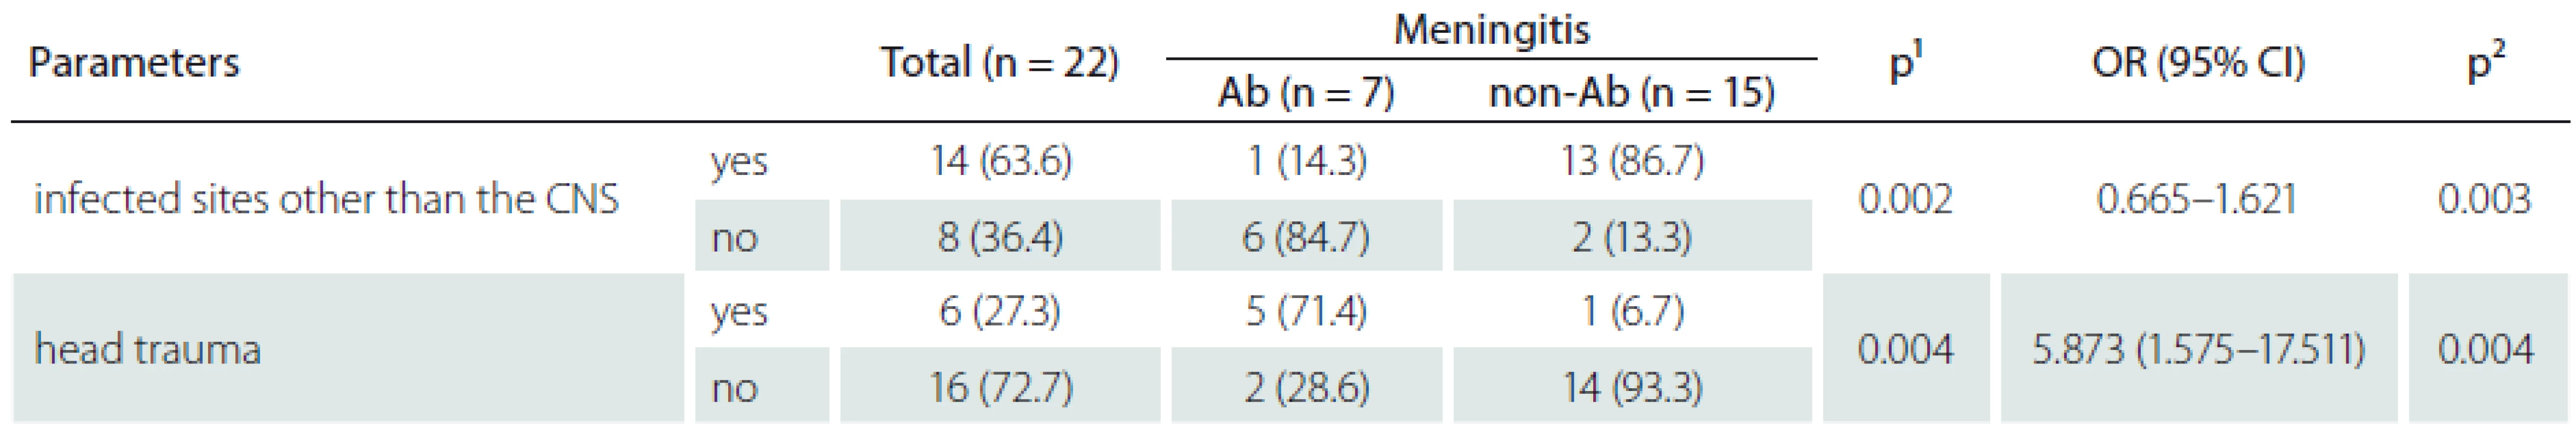 Demography and clinical characteristics between <i>A. baumannii</i> and non-<i>A. baumannii</i> patients who happened post-craniotomy meningitis.